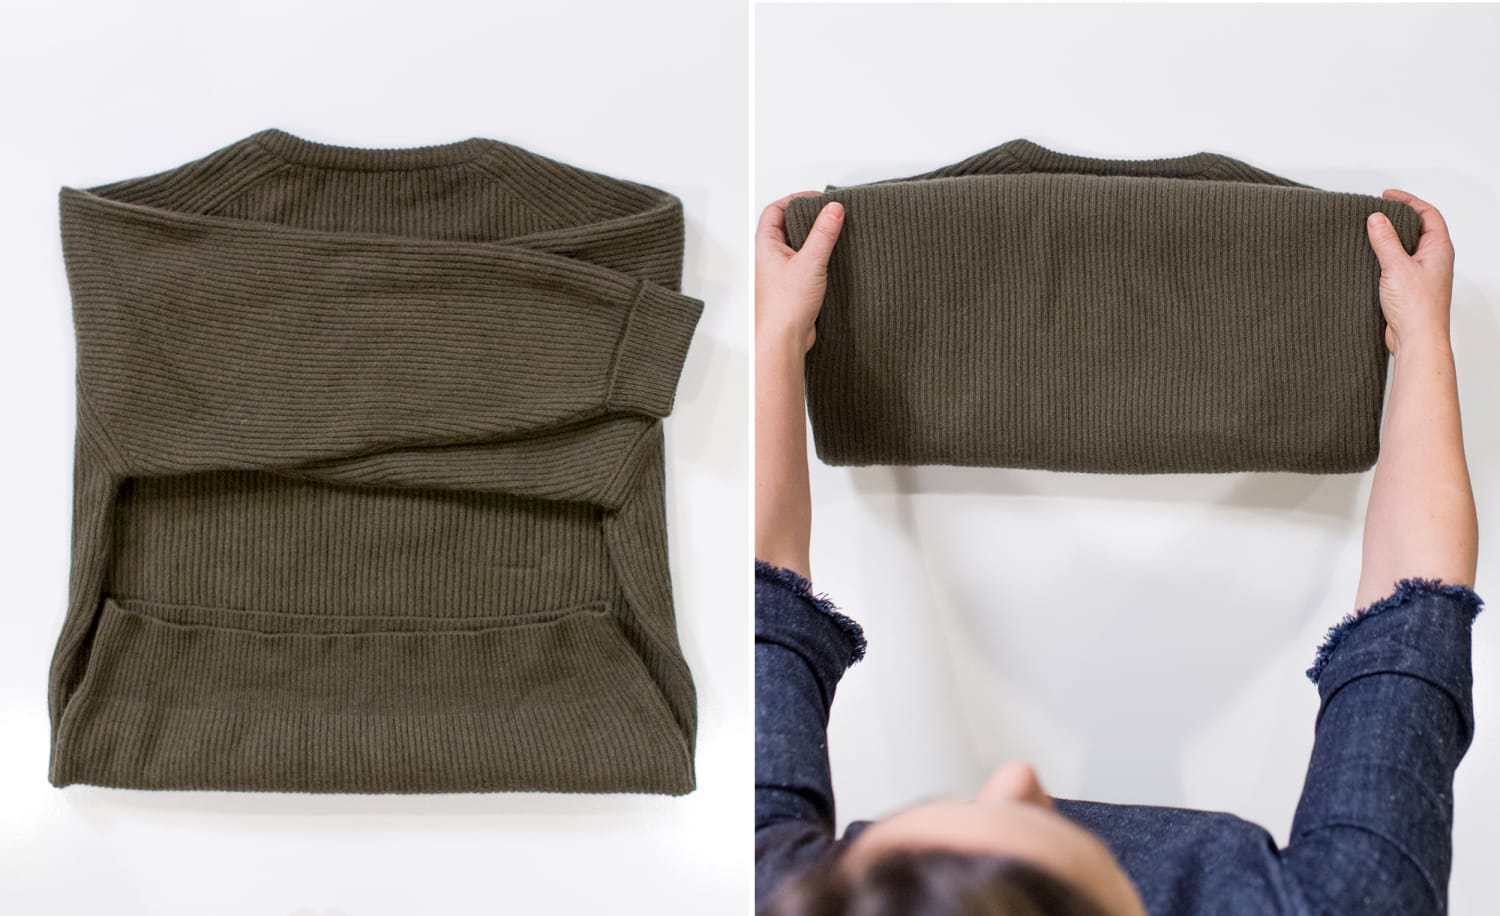 How To Fold A Hoodie To Save Space How to fold chunky sweaters so they take up less space